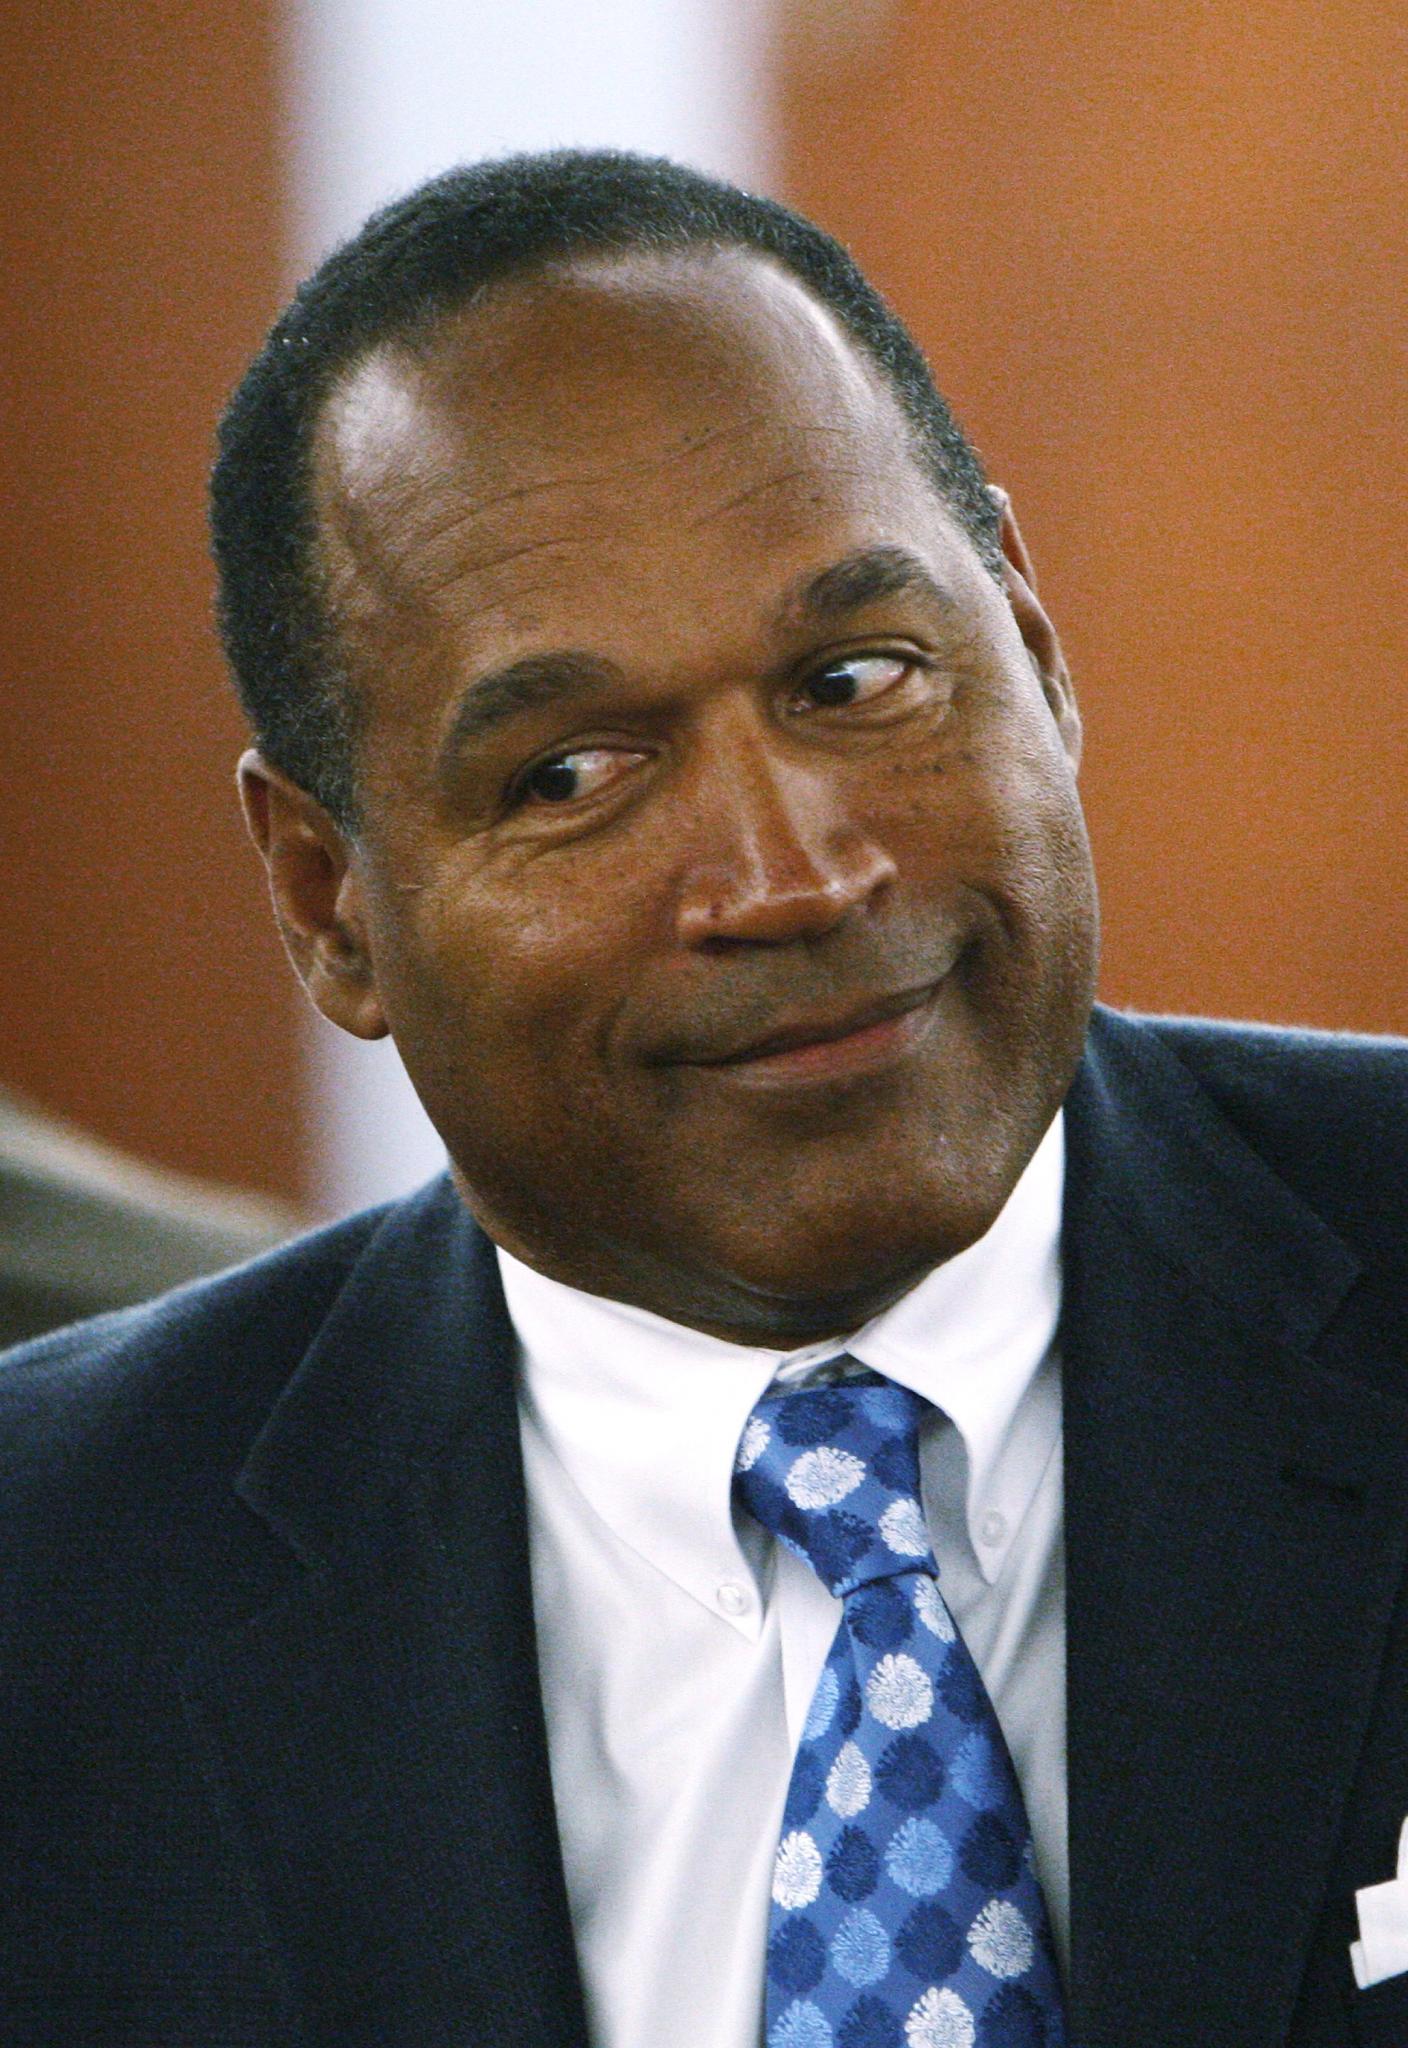 O.J Simpson Is ‘Laughing’ About Found Knife